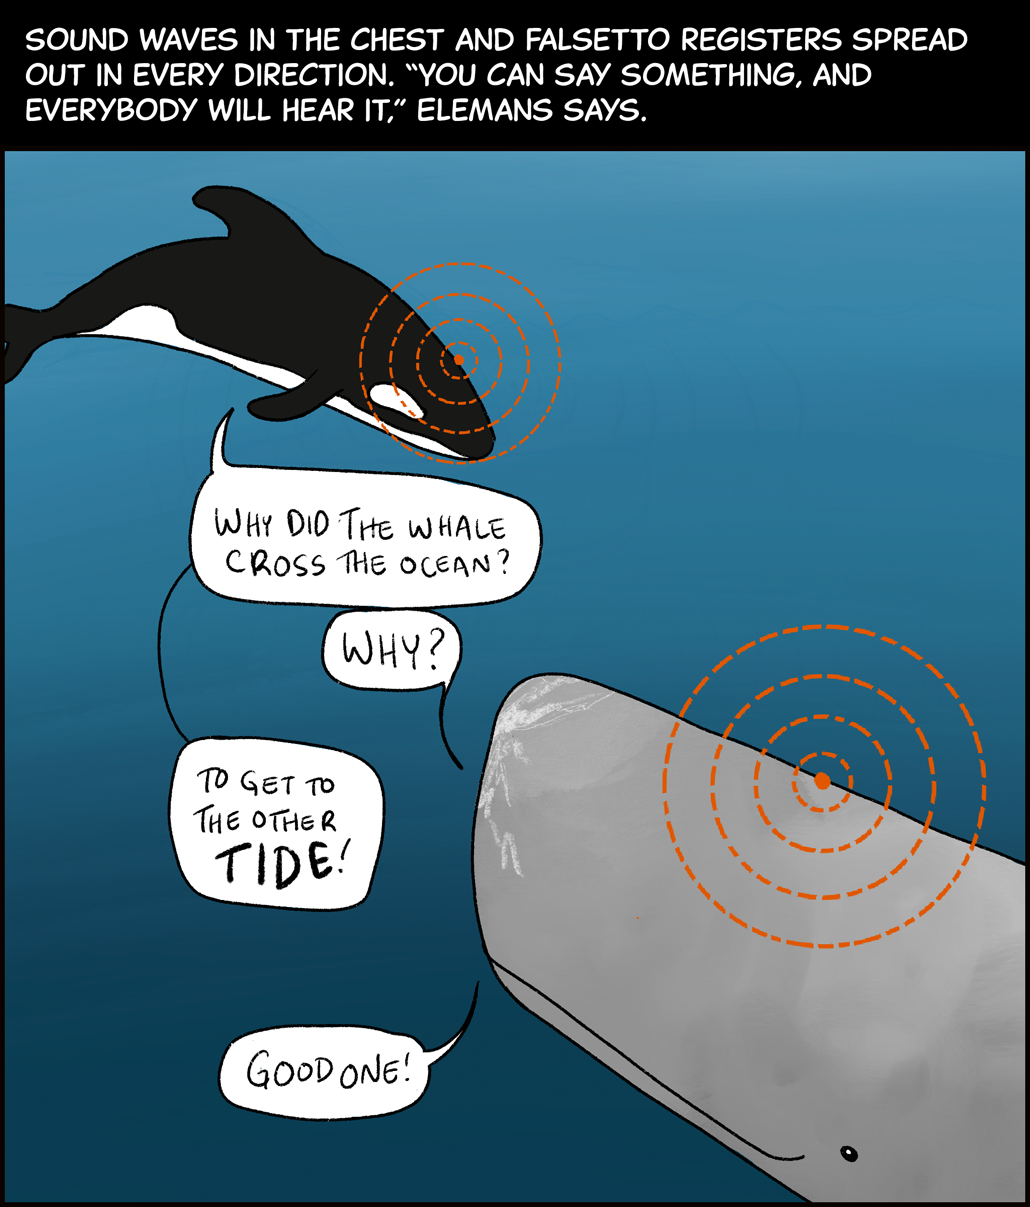 Text (above image): Sound waves in the chest and falsetto registers spread out in every direction. “You can say something, and everybody will hear it,” Elemans says. Image: An orca and a sperm whale face each other. The orca says, “Why did the whale cross the ocean?” The sperm whale says, “Why?” The orca says, “To get to the other tide!” The sperm whale says, “Good one!”